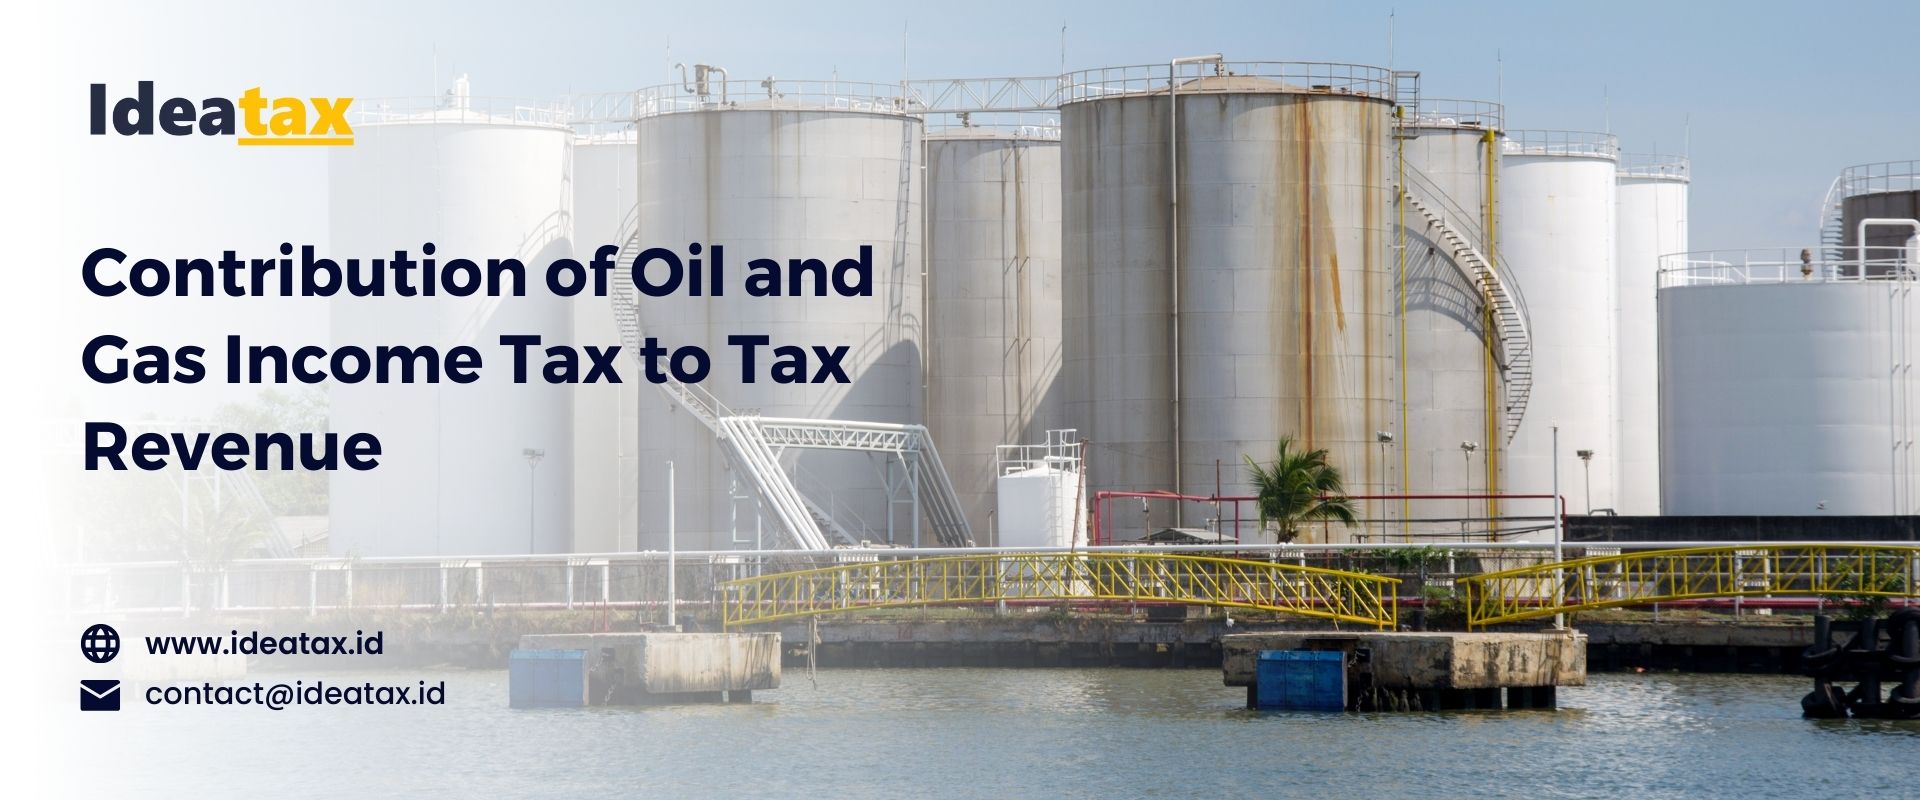 Contribution of Oil and Gas Income Tax to Tax Revenue